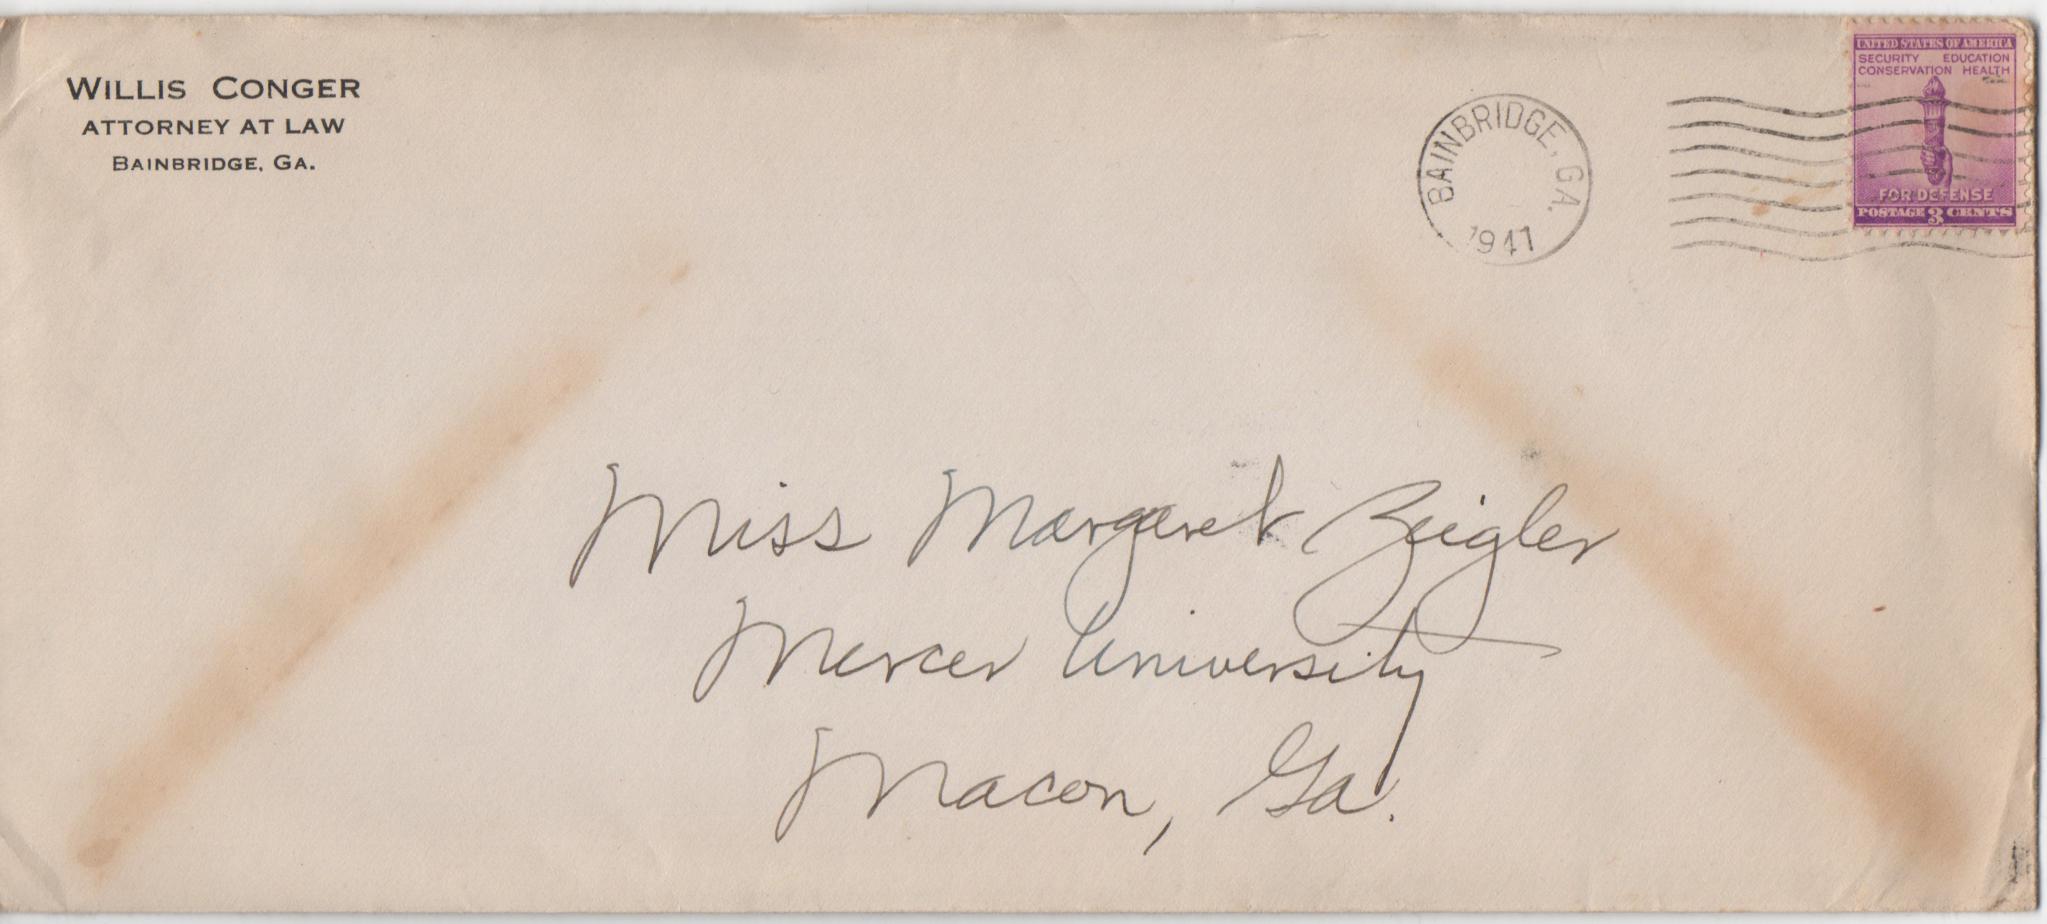 Letter dated February 27, 1941